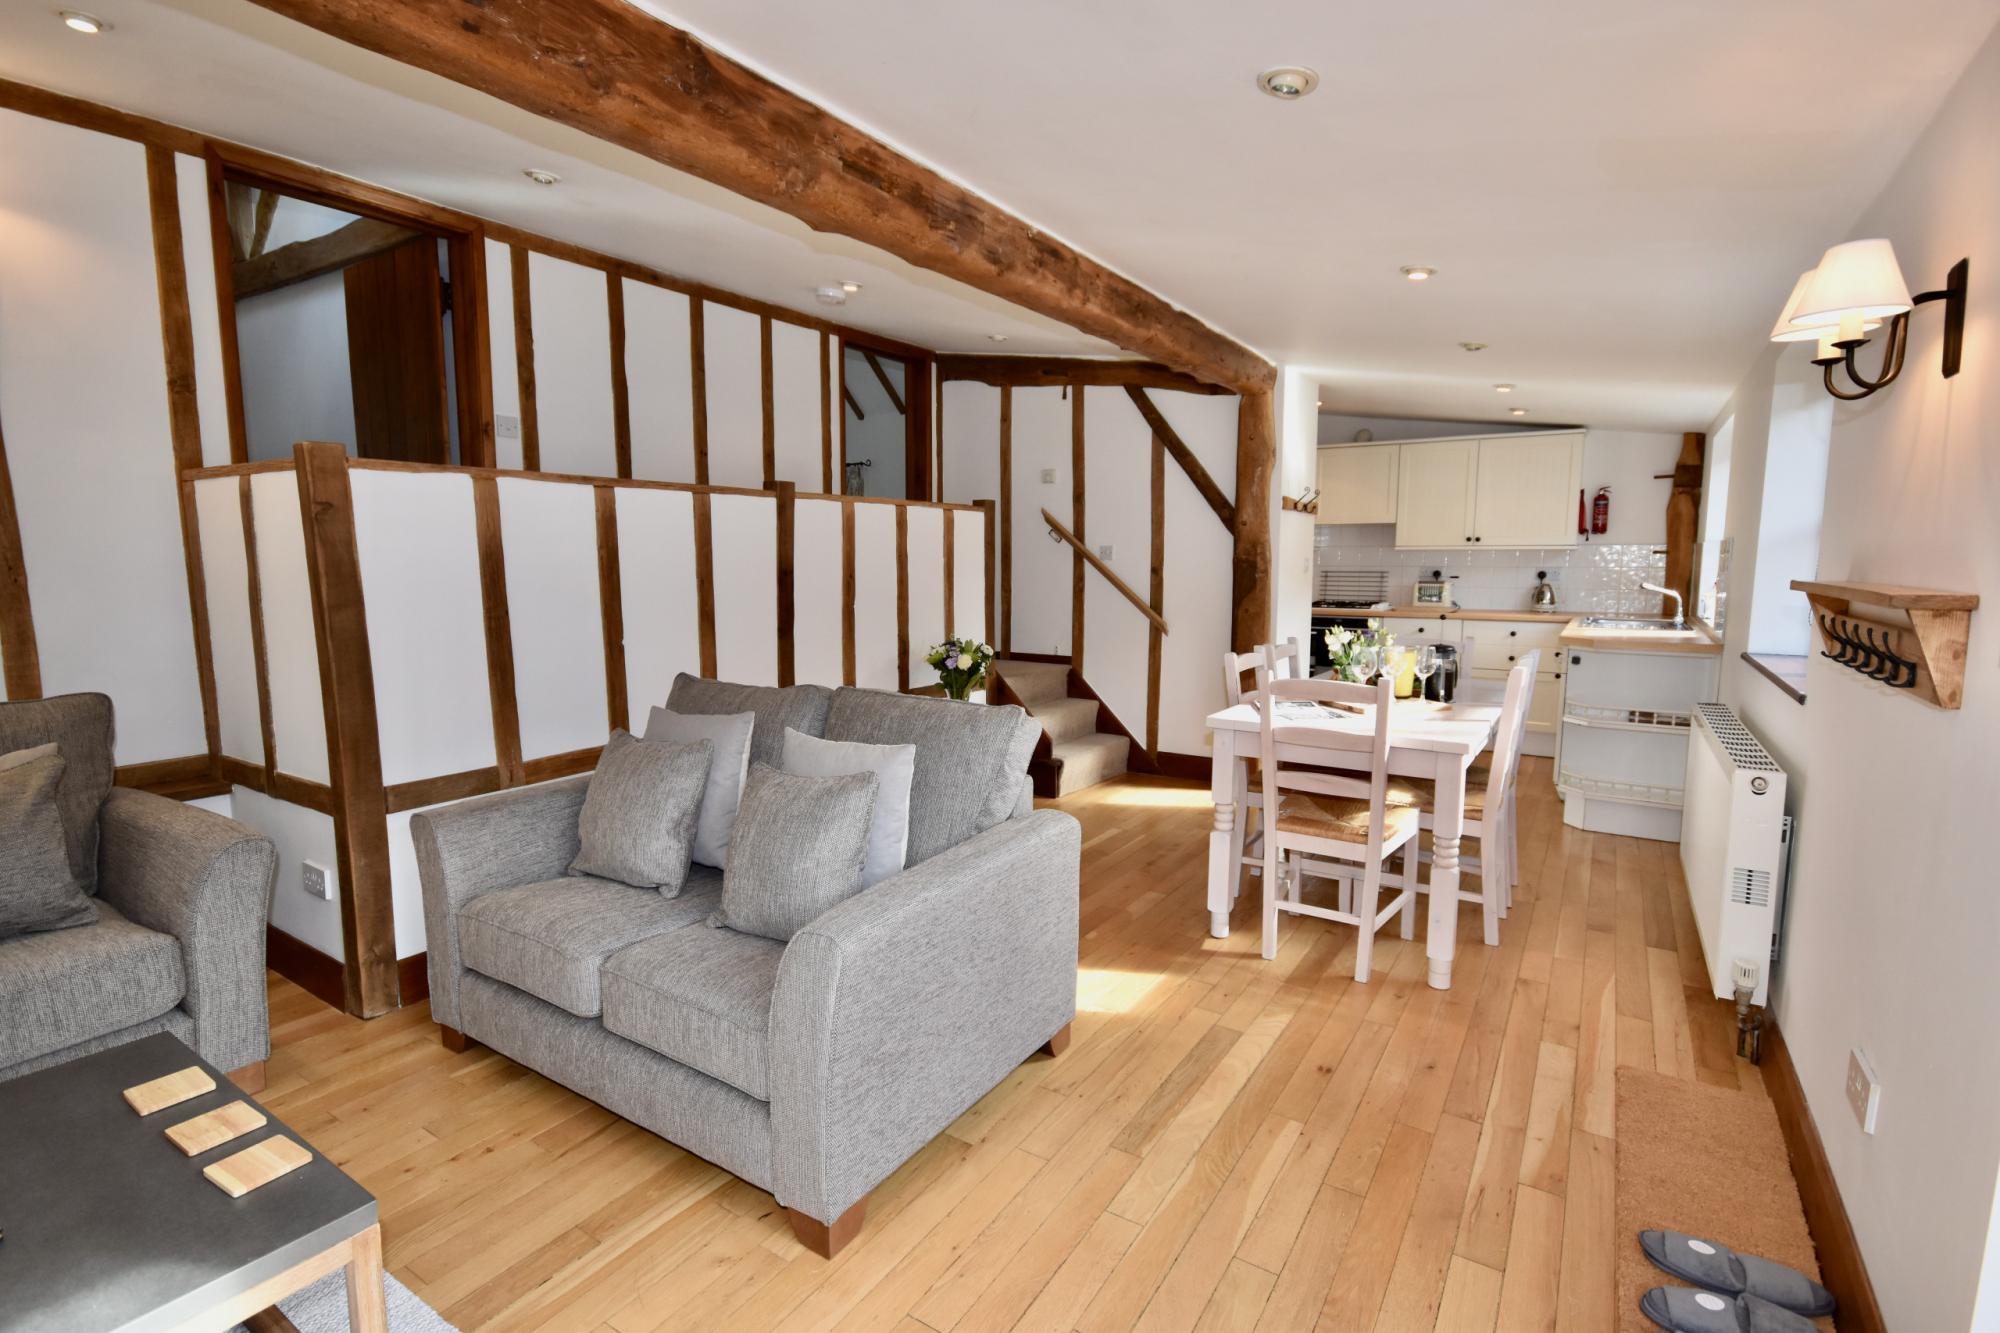 Property Image 2 - The Cote is a stunning converted barn cottage